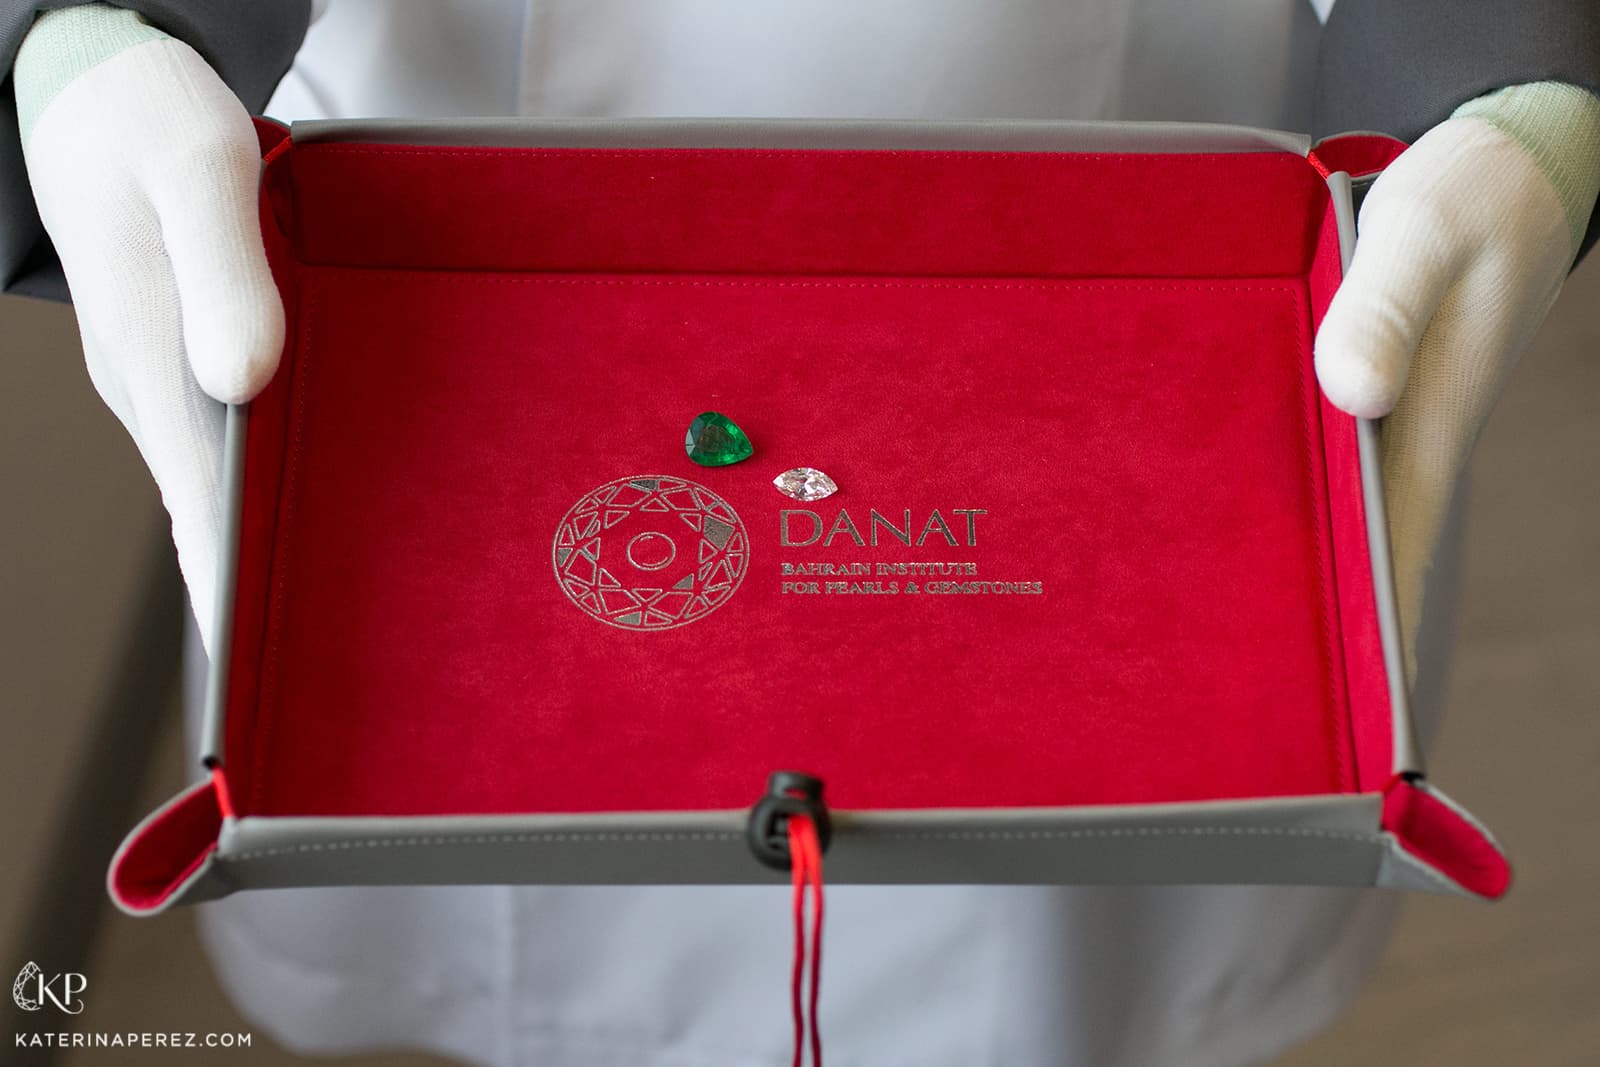 Diamond and emerald tested at DANAT Institute 